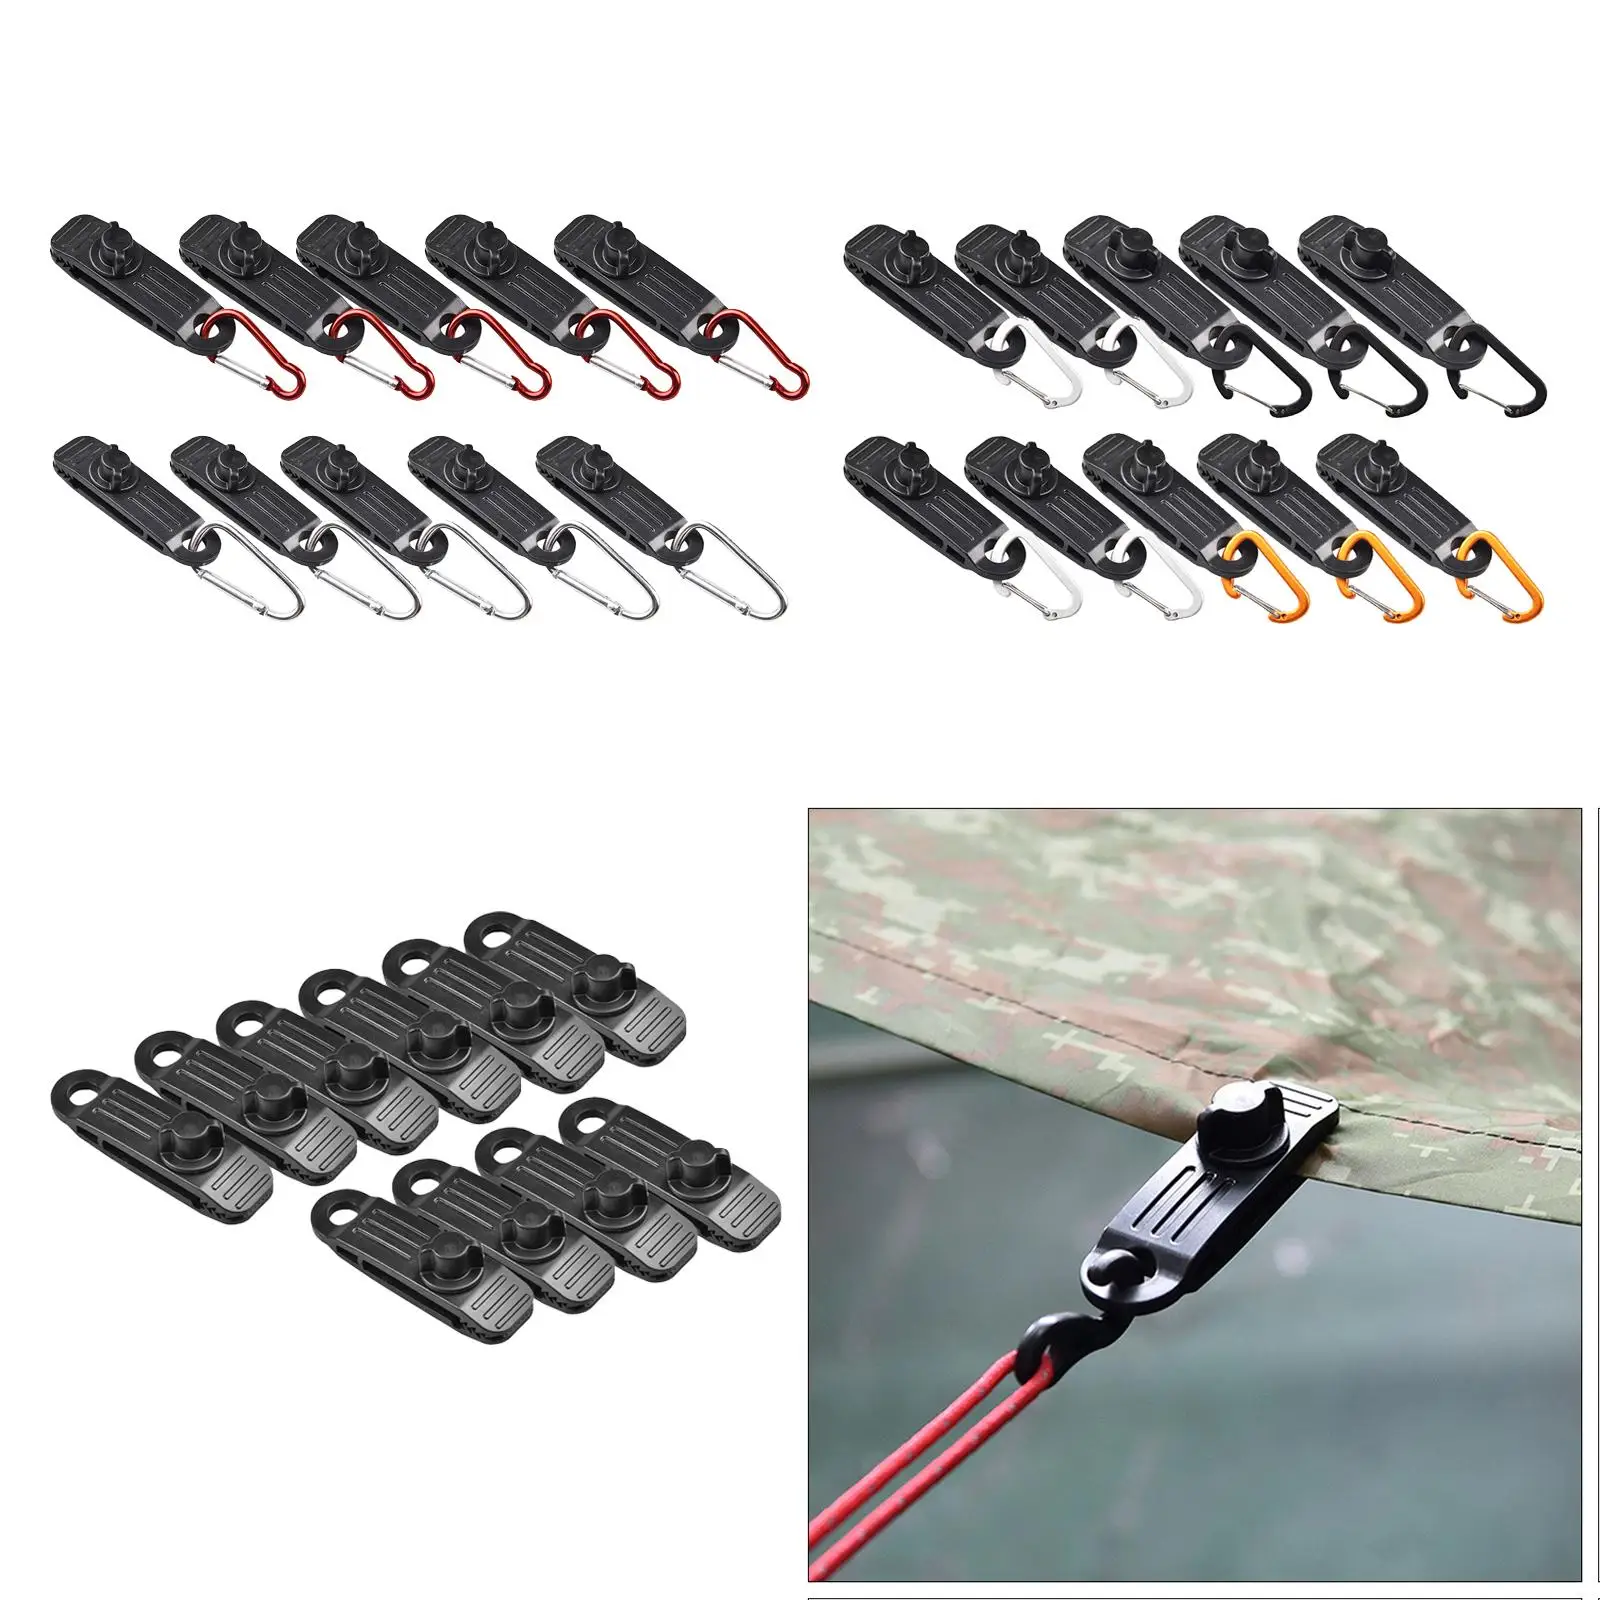 10 Durable Tarp Clips Buckles Tarpaulin Tent Snaps Clamps Hiking Backpacking